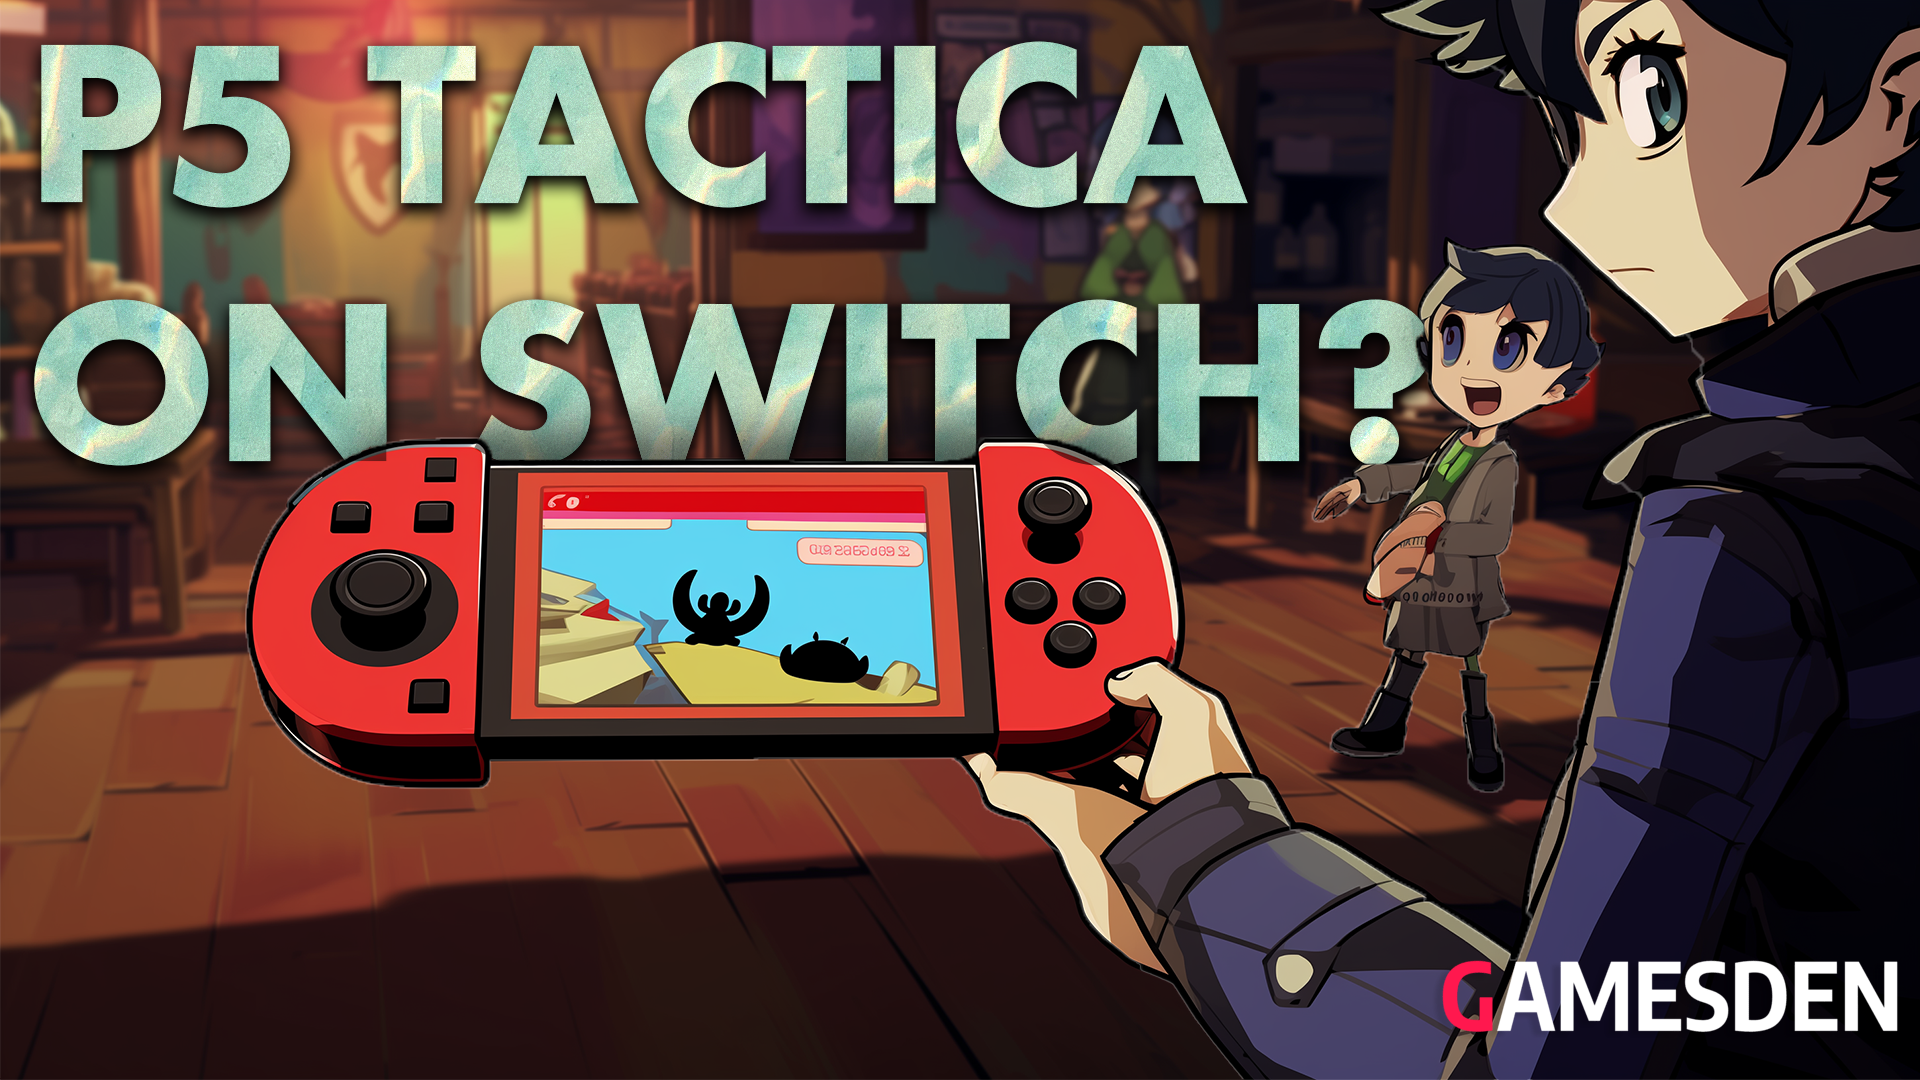 Is Persona 5 Tactica On Nintendo Switch?